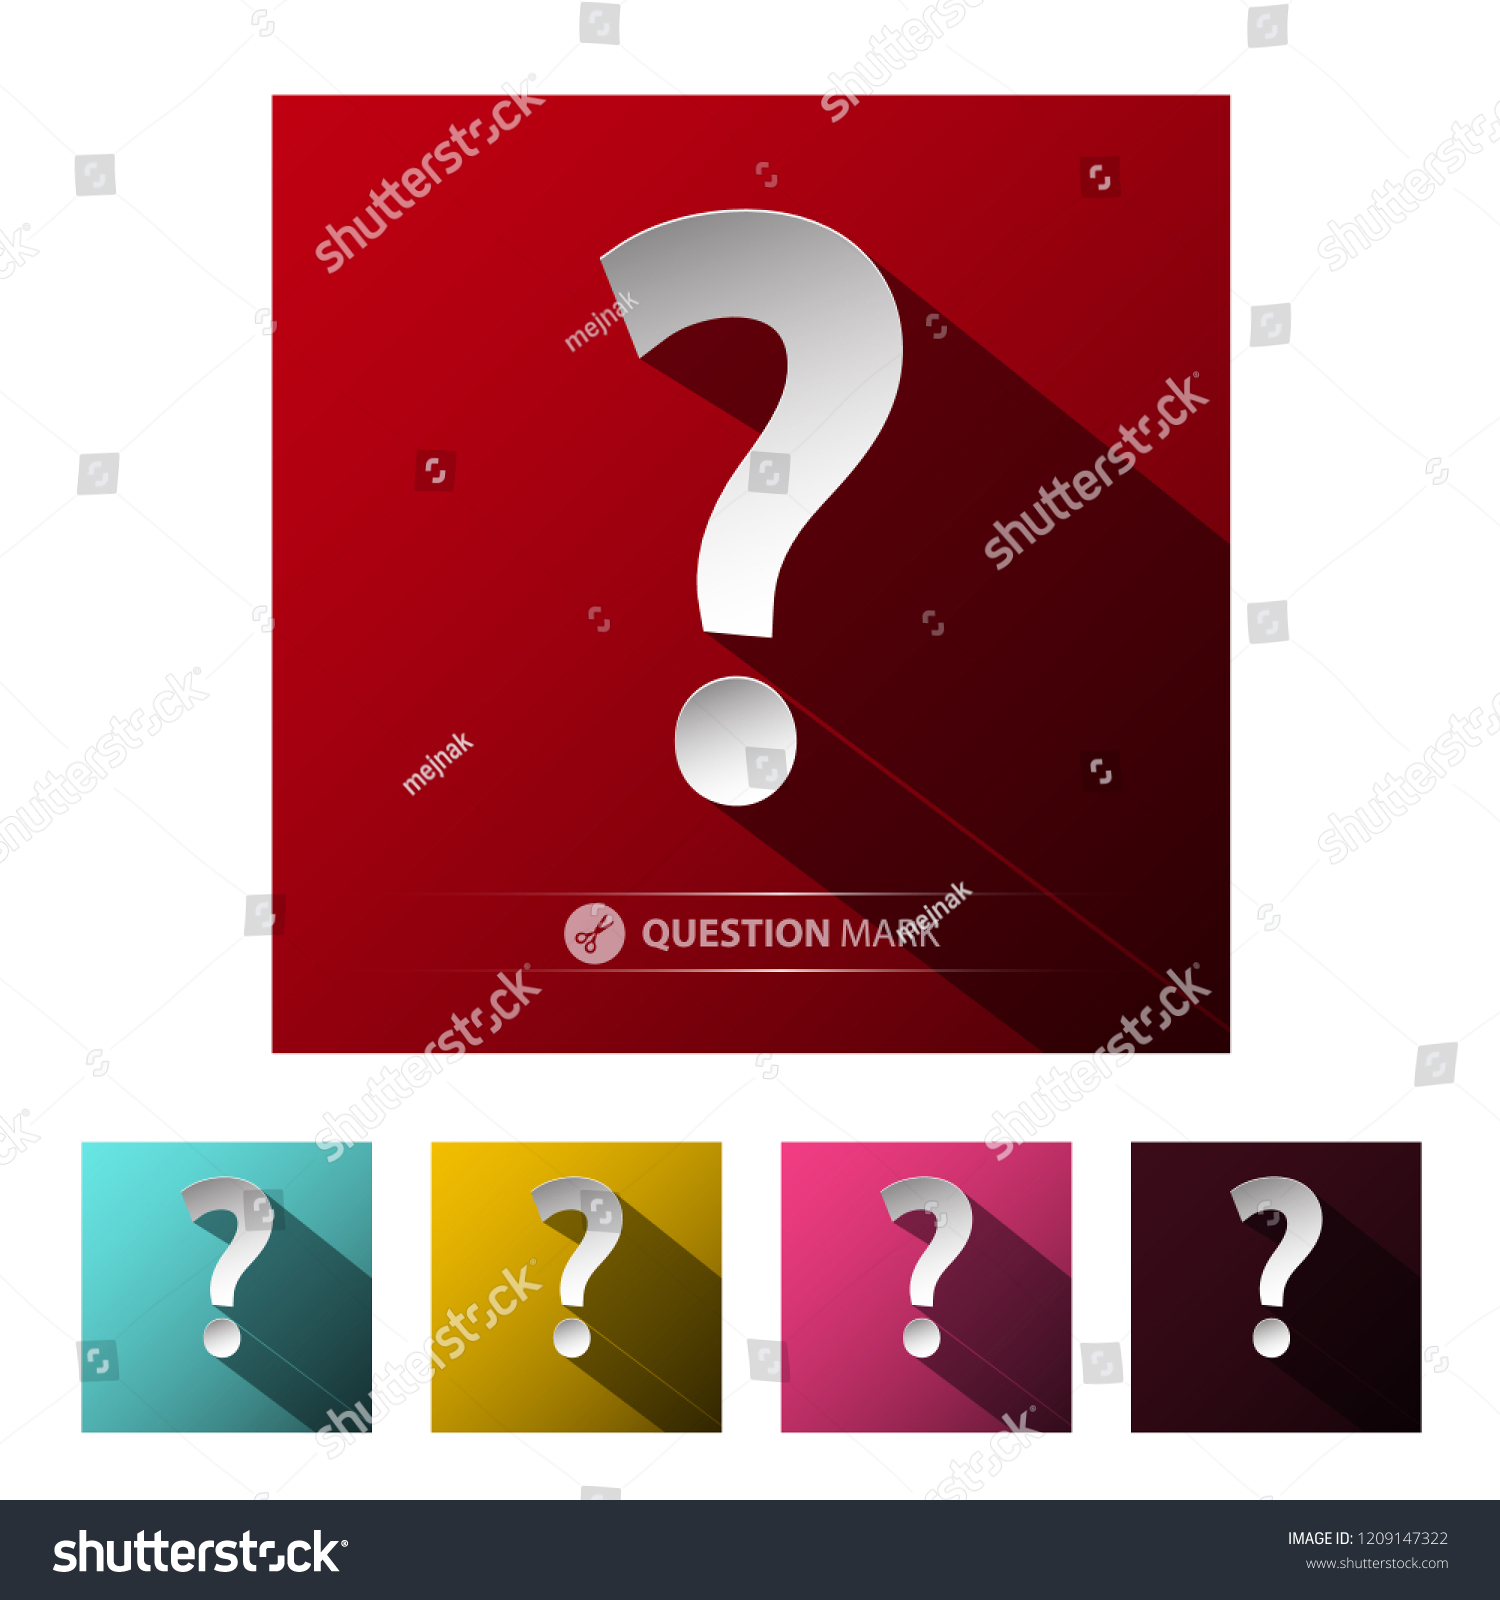 Question Mark Symbols Set Isolated On Stock Vector Royalty Free 1209147322 5290